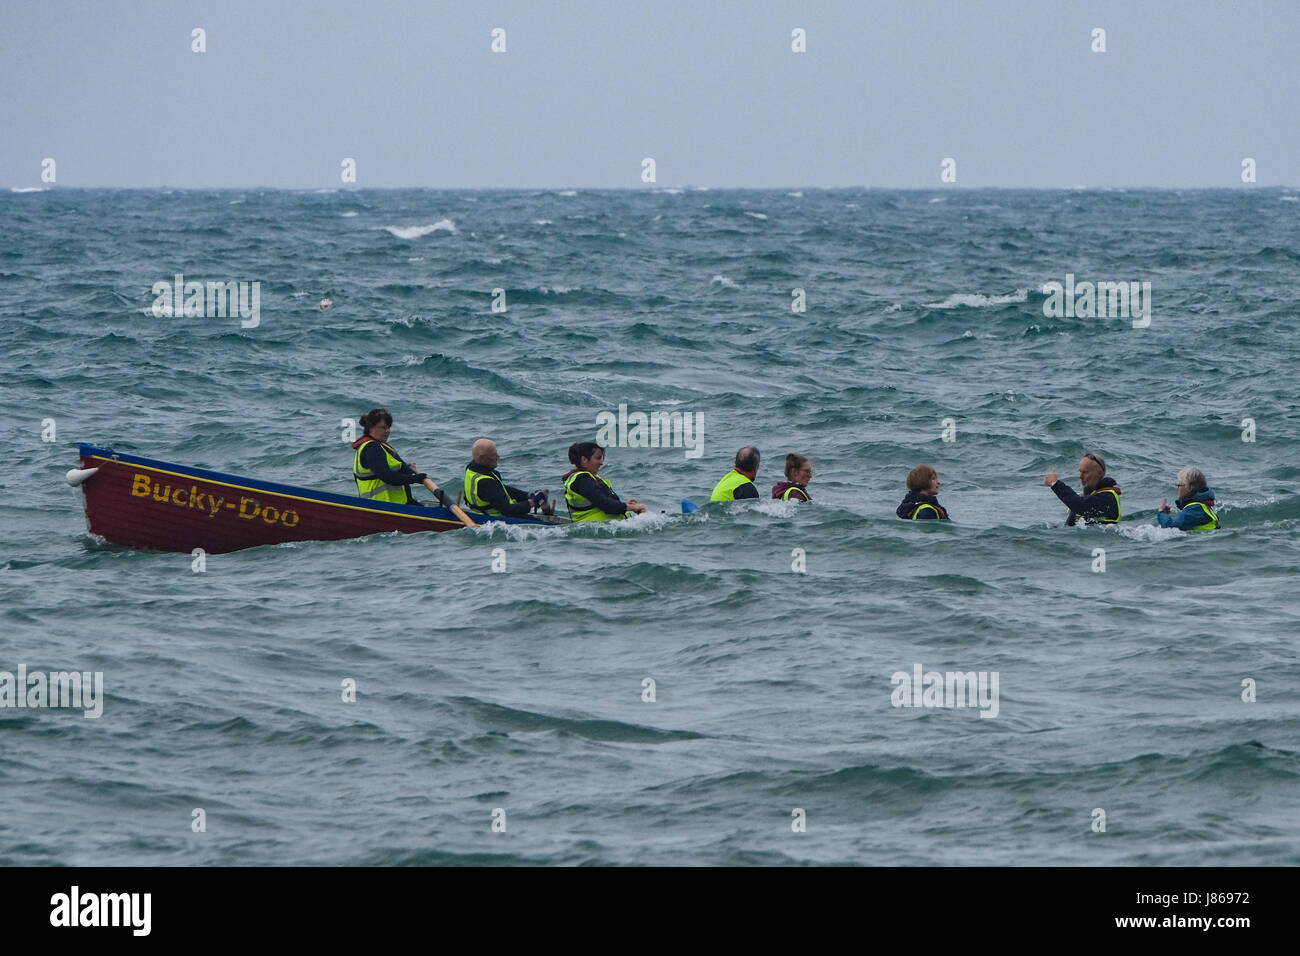 West Bay, Dorset, UK. 27th May, 2017. Bridport Gig club members take the "Bucky-Doo" gig out in decidedly choppy waters after a night of thunder and rain on the Dorset coast. Gig racing is a rapidly expanding sport. There are over 50 clubs and some 140 boats in the South West of England. Credit: Tom Corban/Alamy Live News Stock Photo